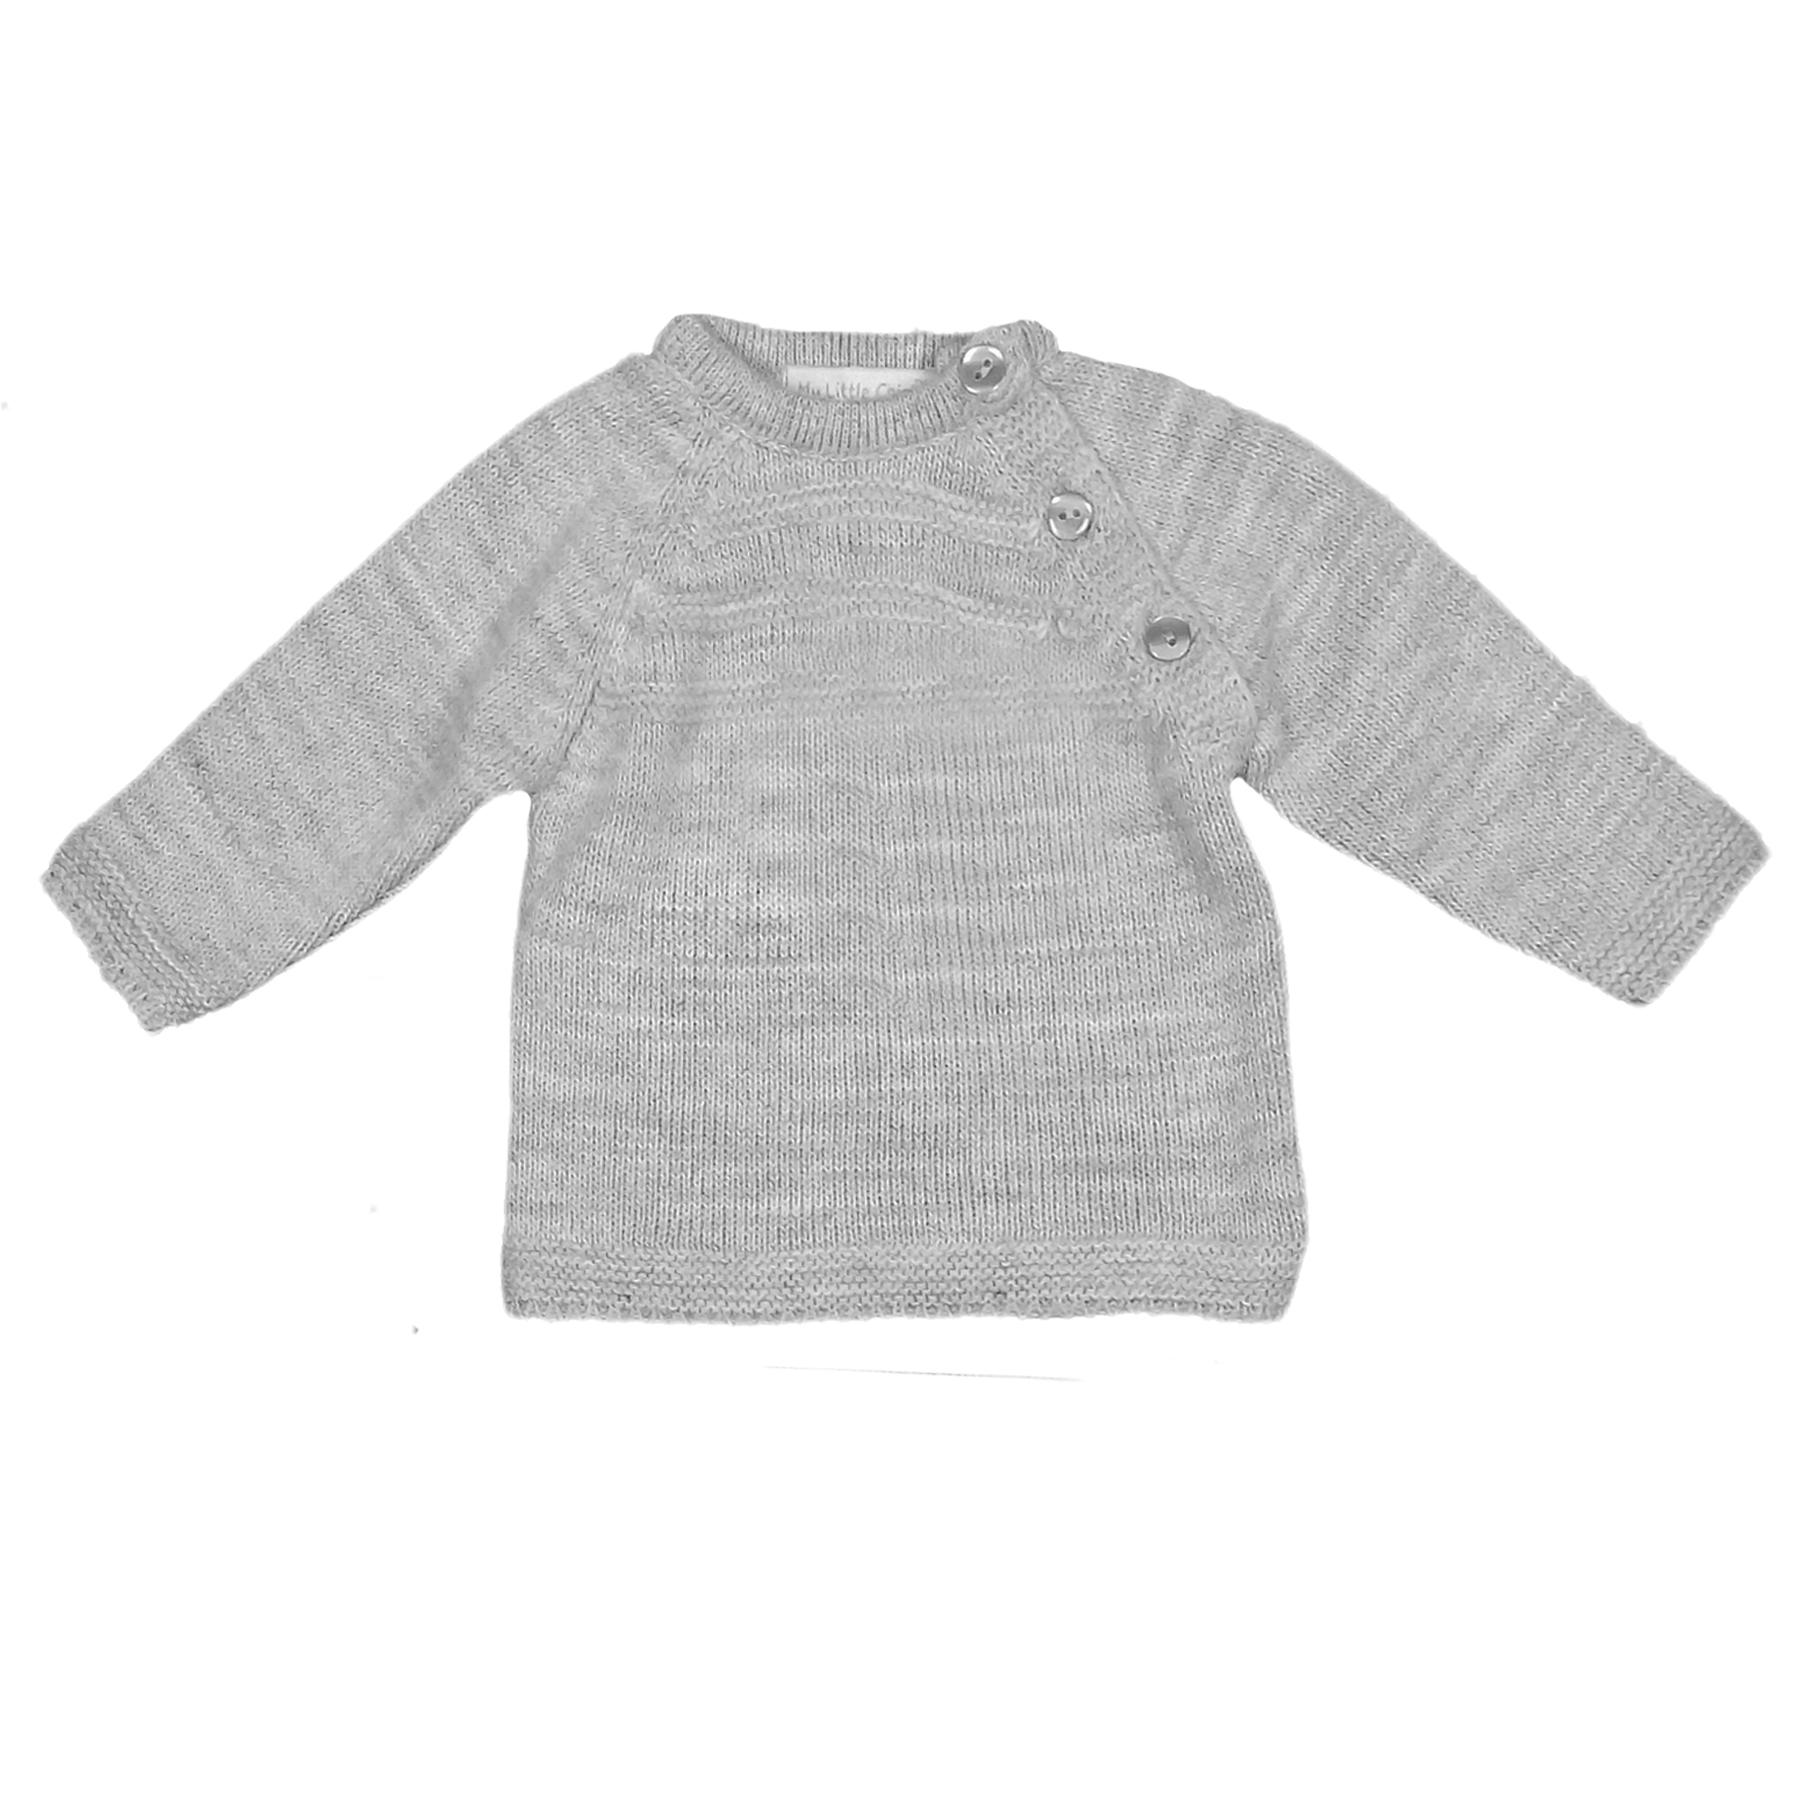 My Little Chick Grey Knitted Top